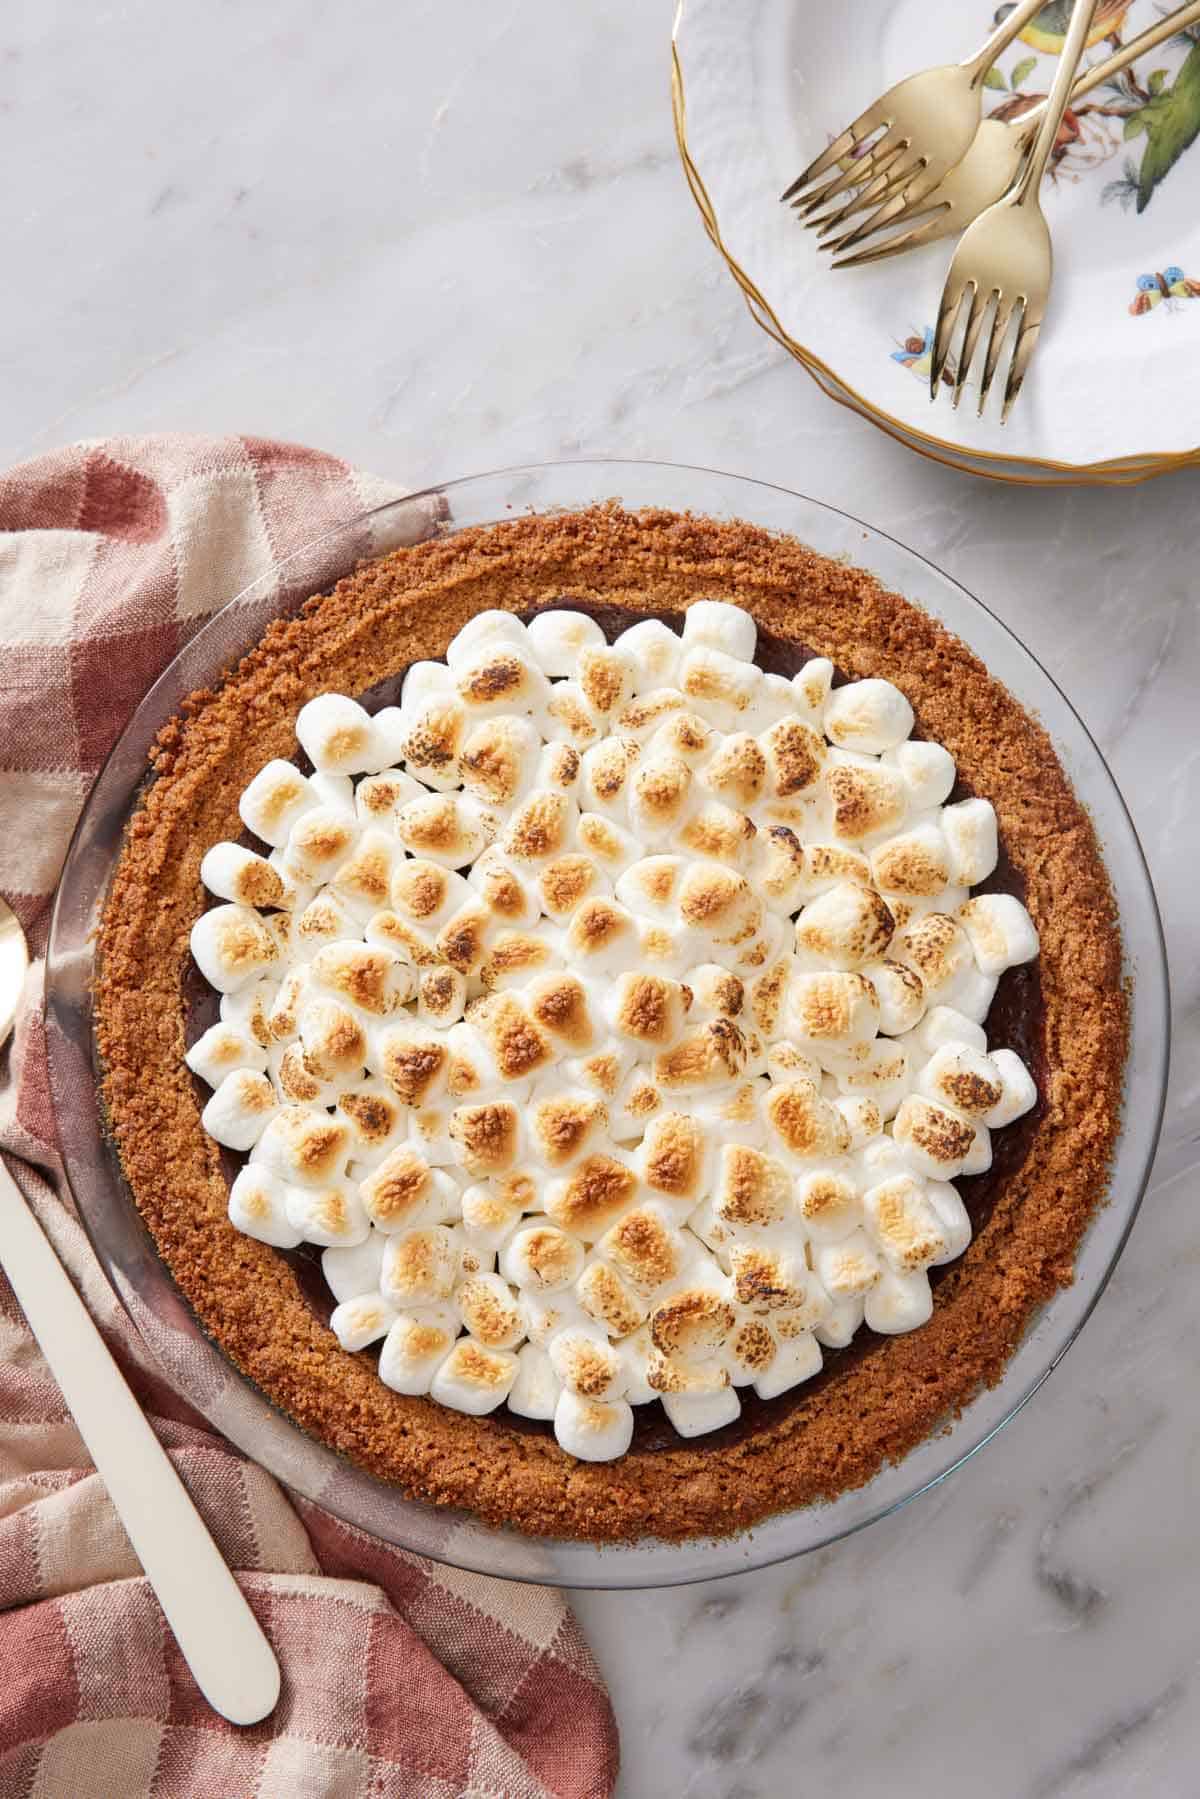 Overhead view of a s'more pie with a stack of plates and forks off to the side.